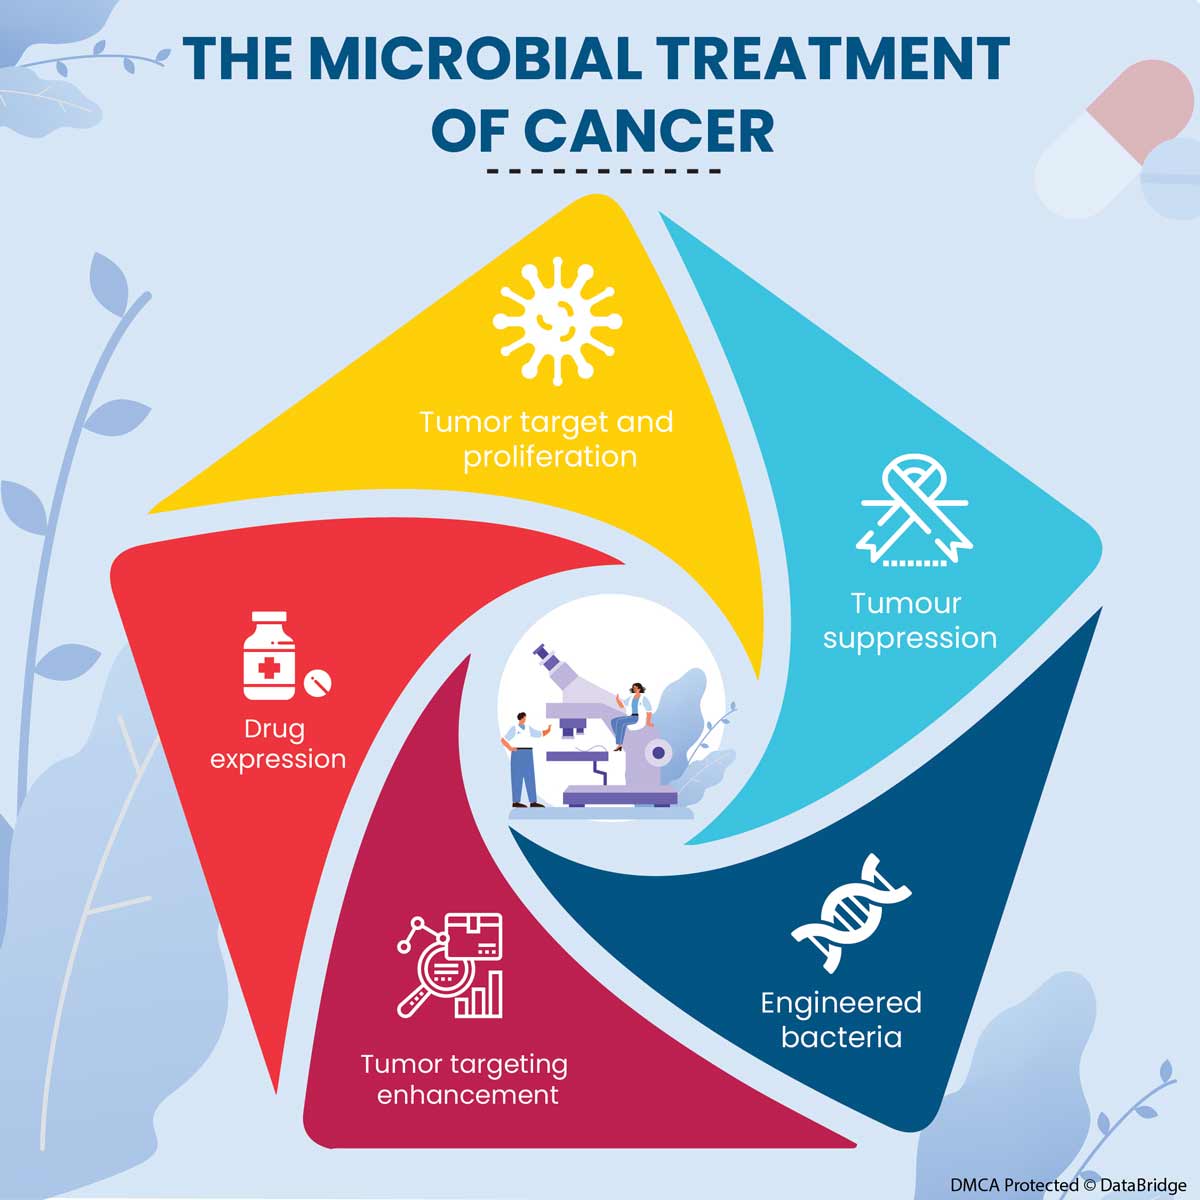 The Microbial Treatment of Cancer